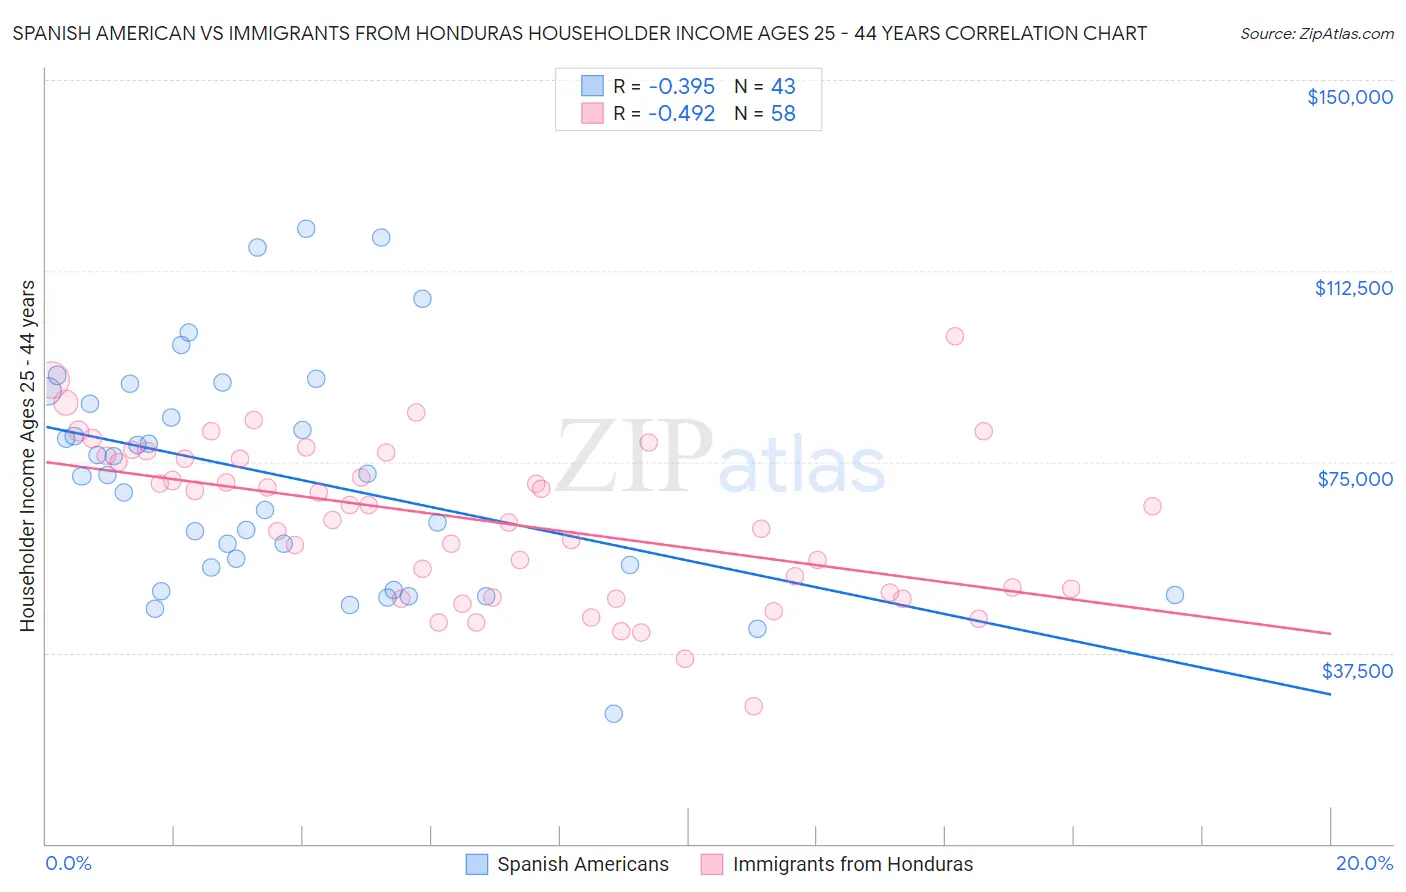 Spanish American vs Immigrants from Honduras Householder Income Ages 25 - 44 years